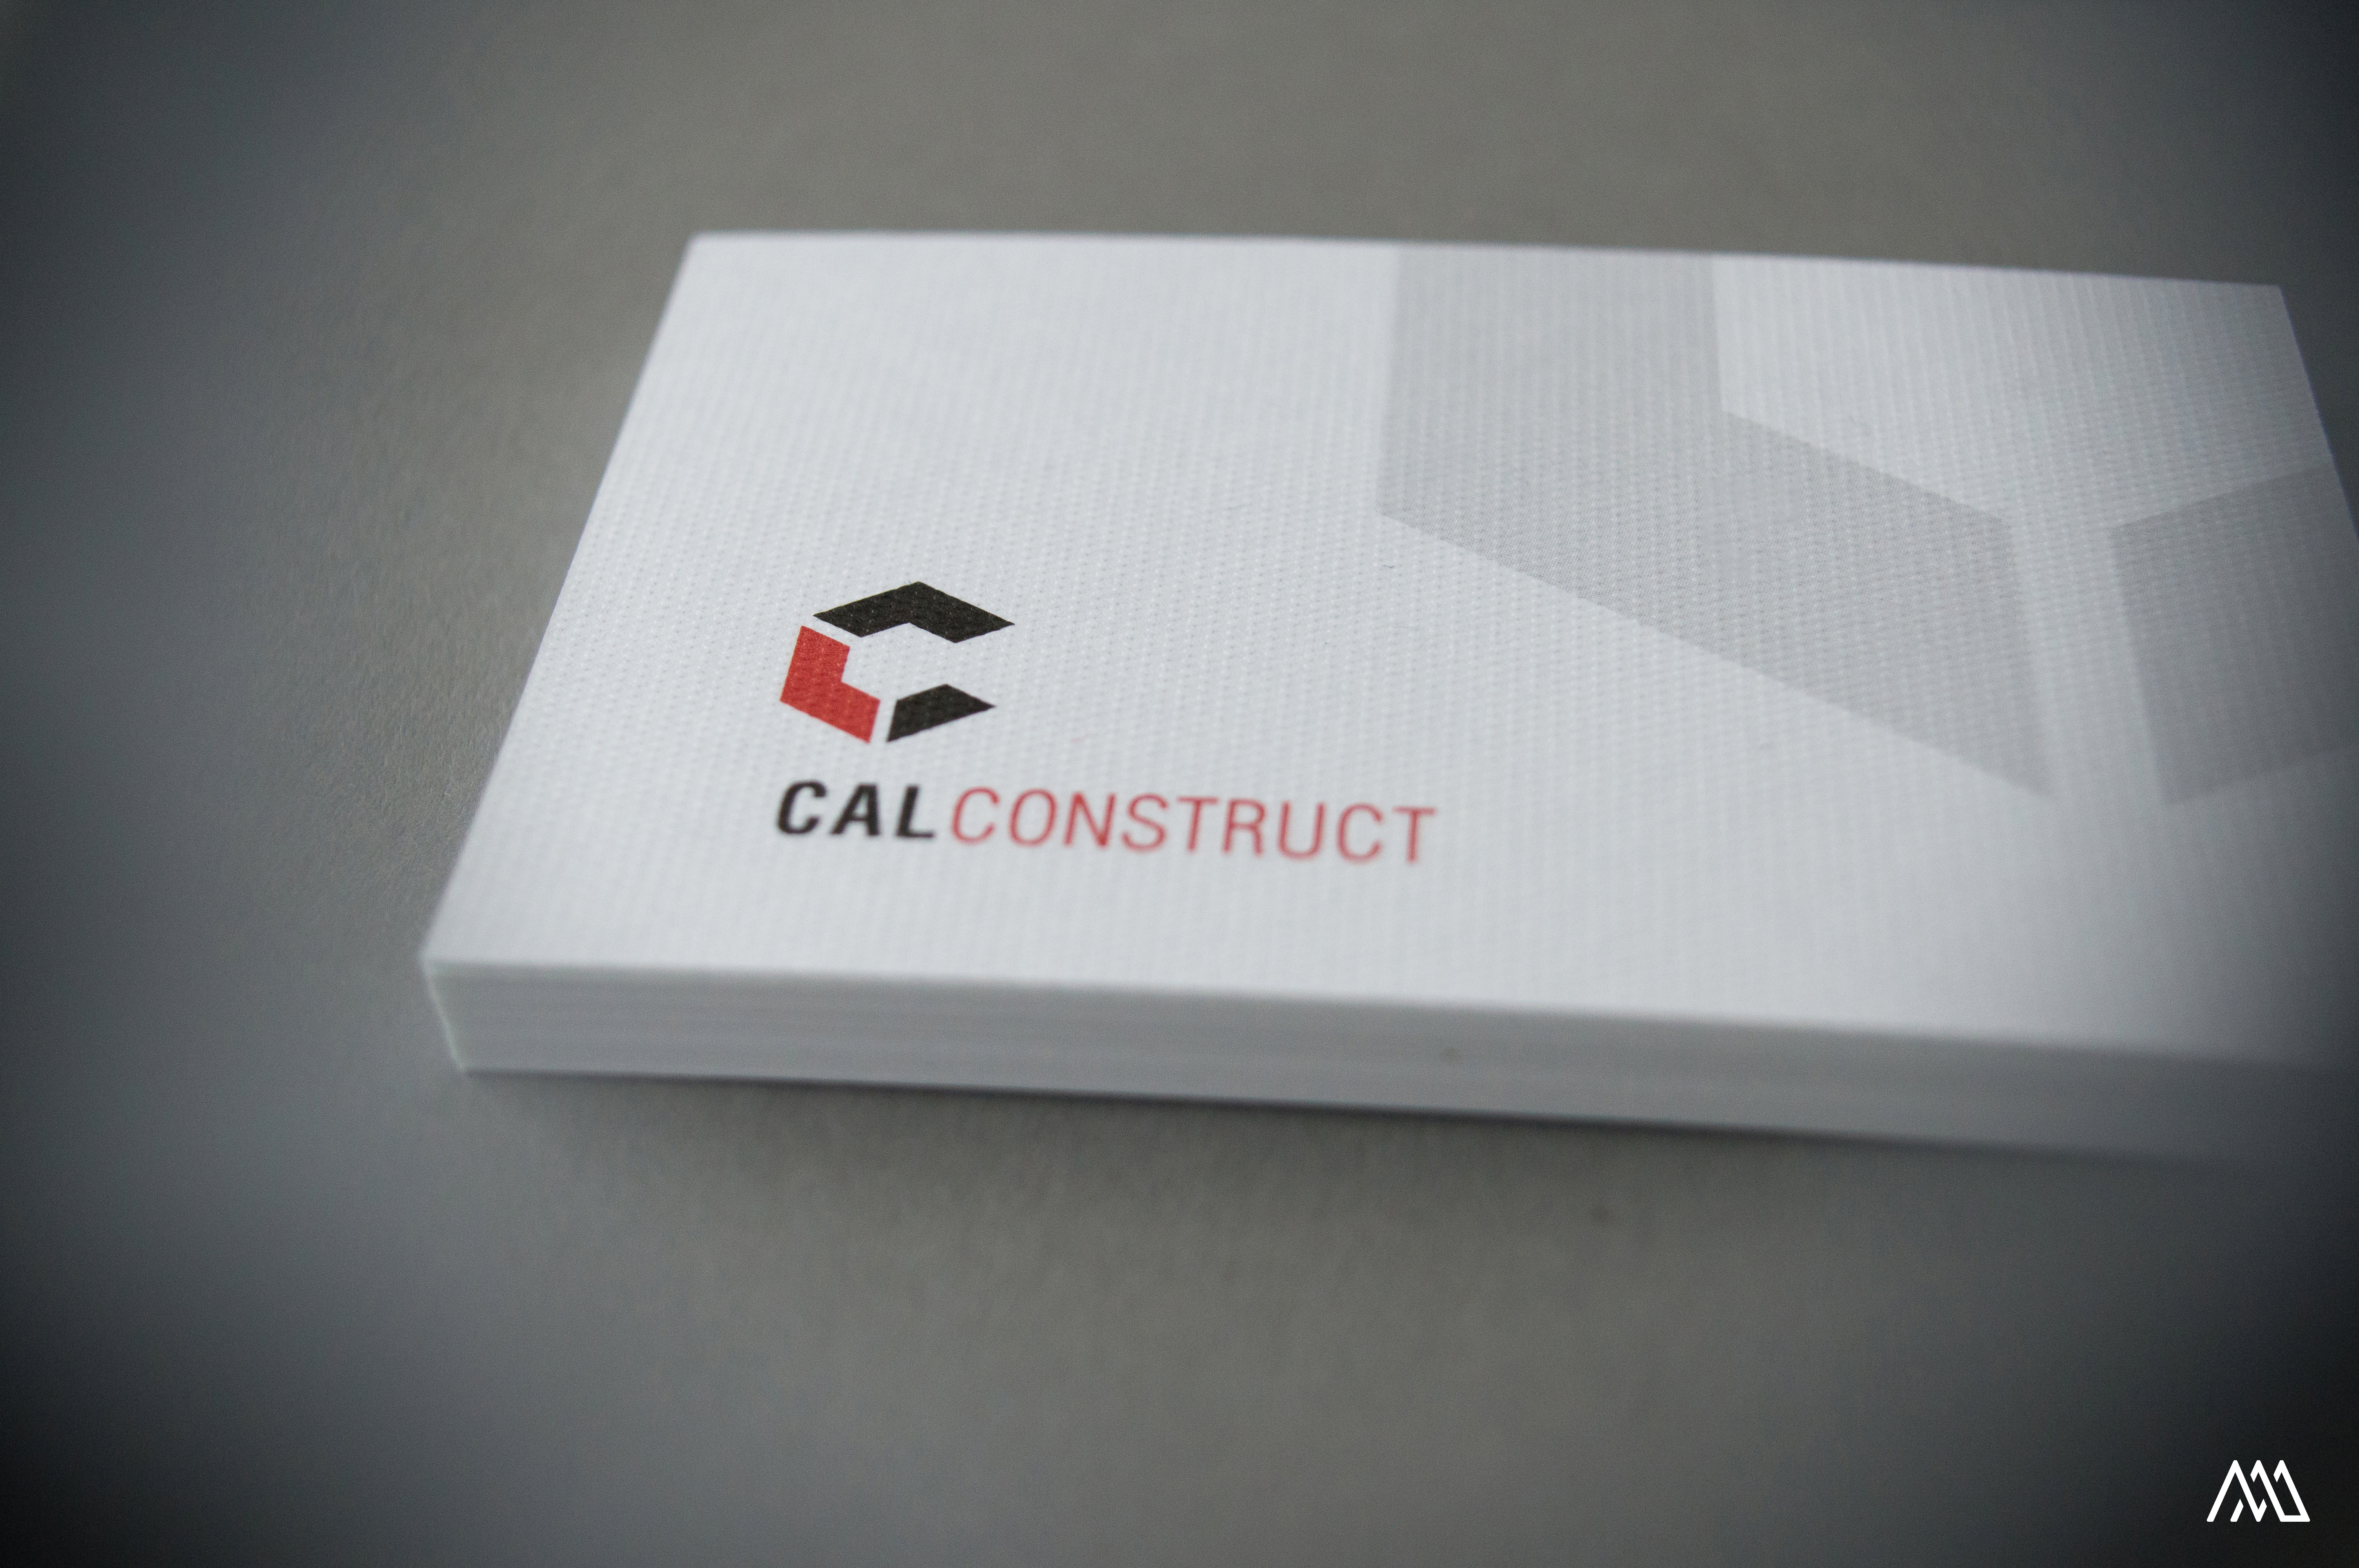 papeterie cal construct talata studio photographie